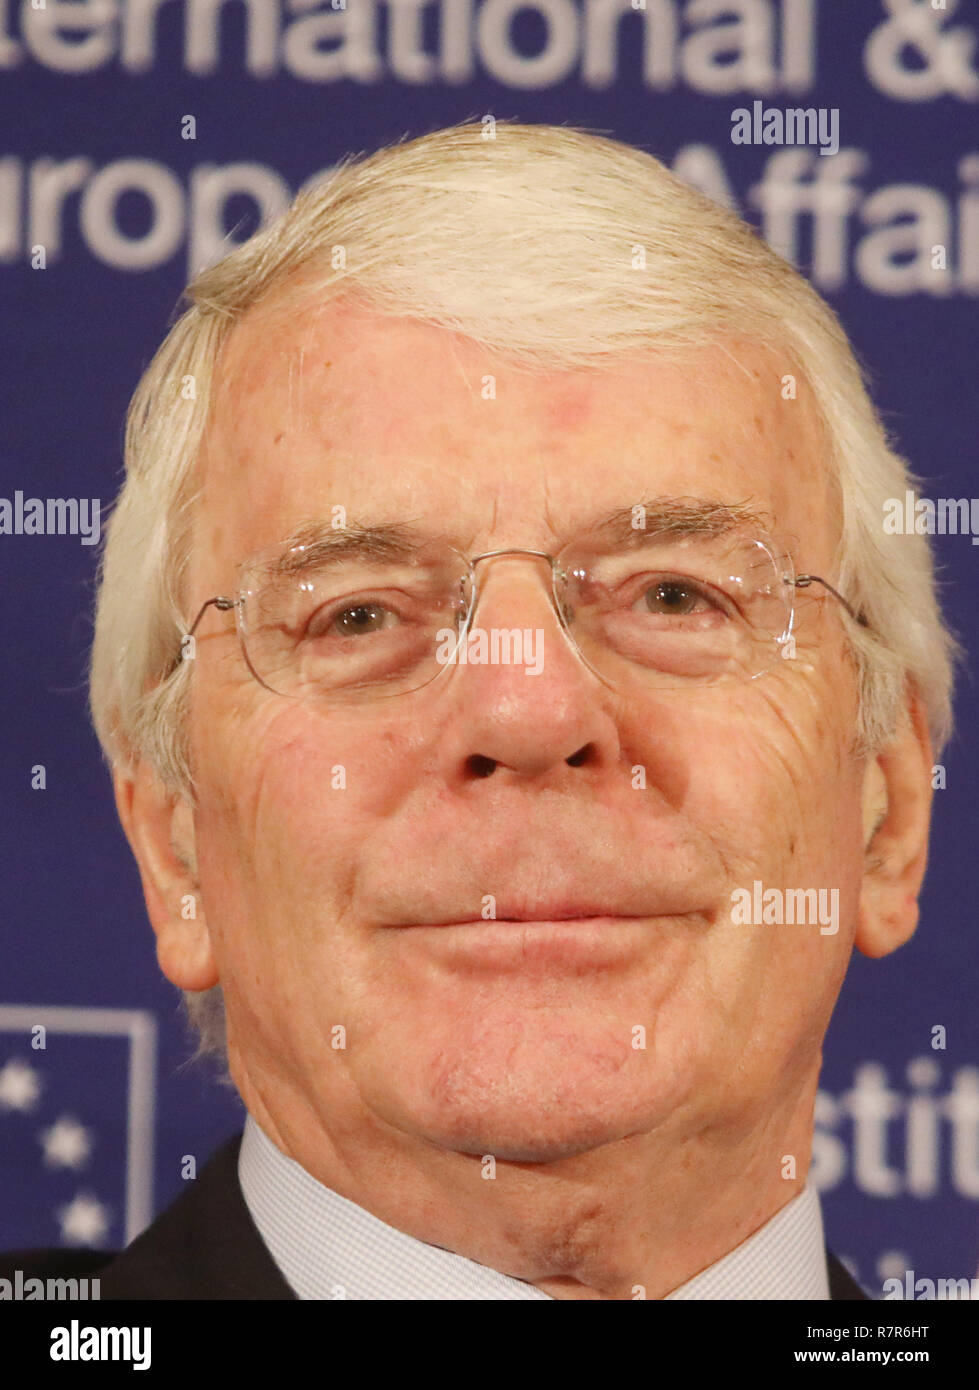 11/12/2018 John Major In Dublin. The Rt Hon Sir John Major KG CH, former Prime Minister of the United Kingdom 1990-1997 speaking at a keynote address, entitled The United Kingdom and Ireland in a New World, marking the 25th Anniversary of the Downing Street Declaration. He was also speaking about the Brexit crisis. During his speech he called for the British Government to revoke Article 50 with immediate effect. Photo: Leah Farrell/RollingNews.ie Stock Photo